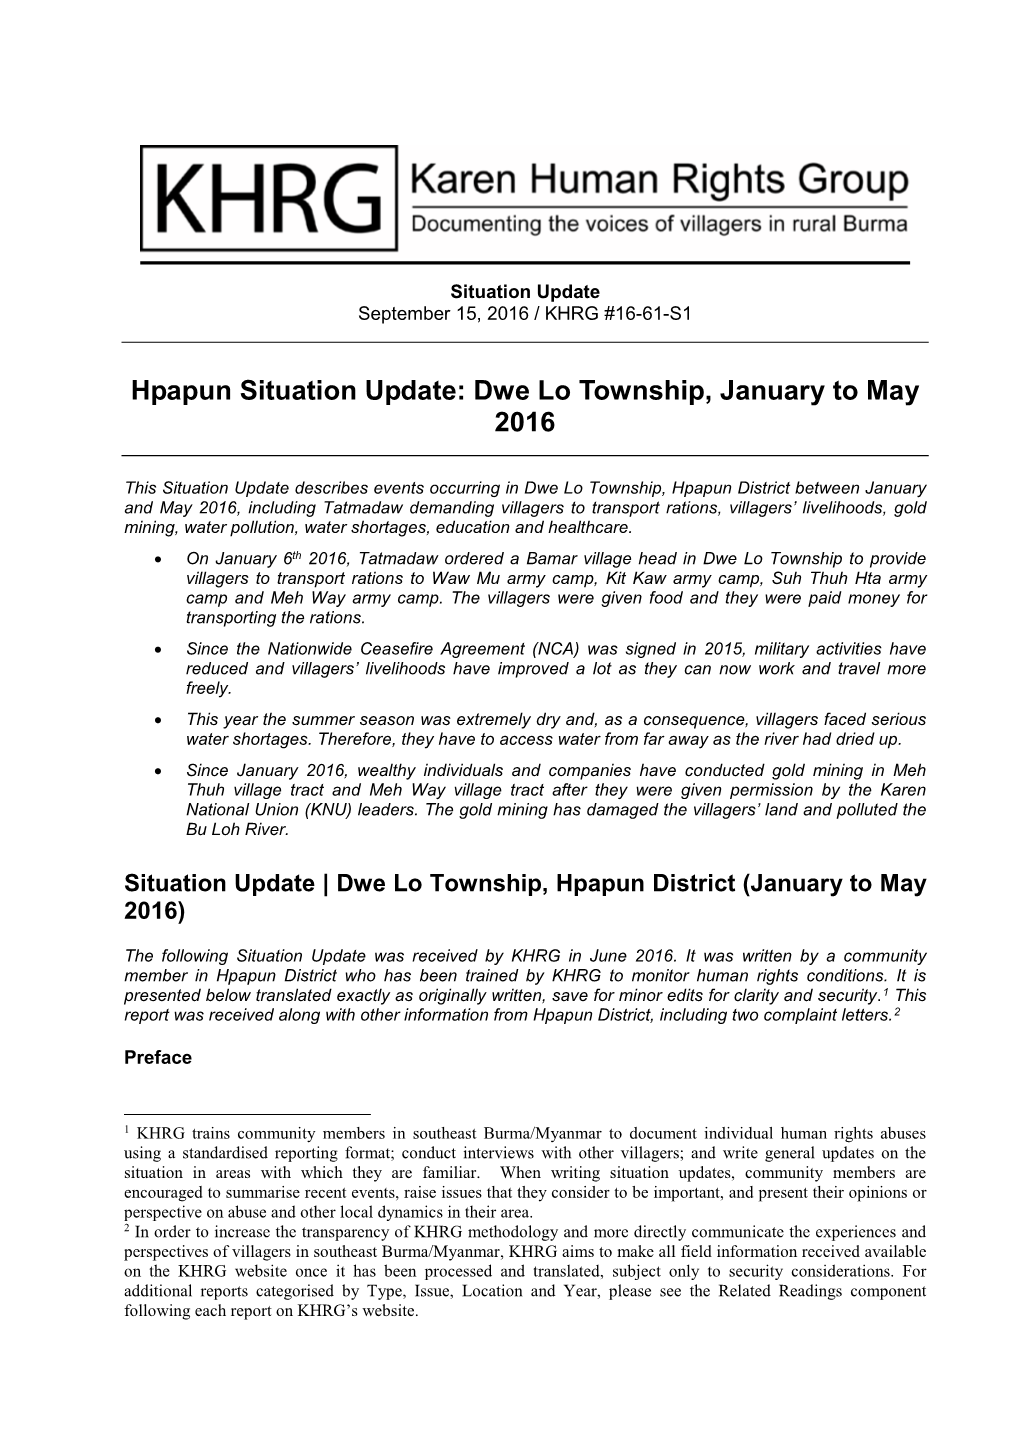 Hpapun Situation Update: Dwe Lo Township, January to May 2016